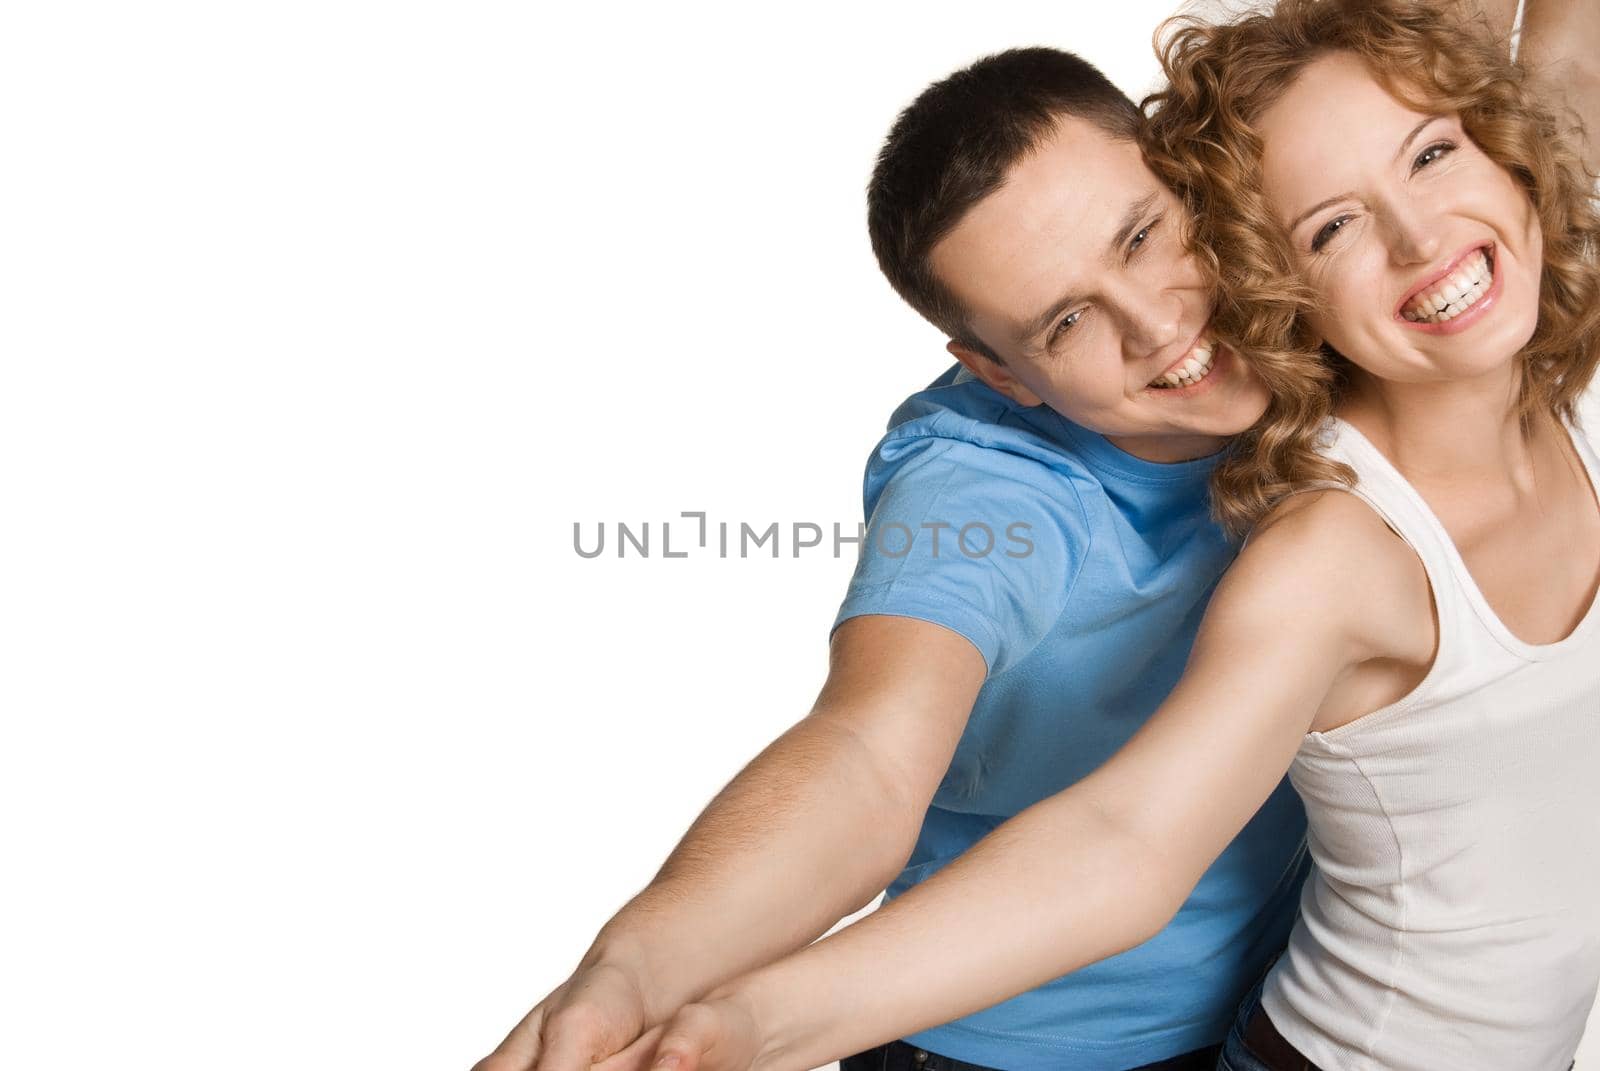 Portrait of a beautiful young happy smiling couple - isolated